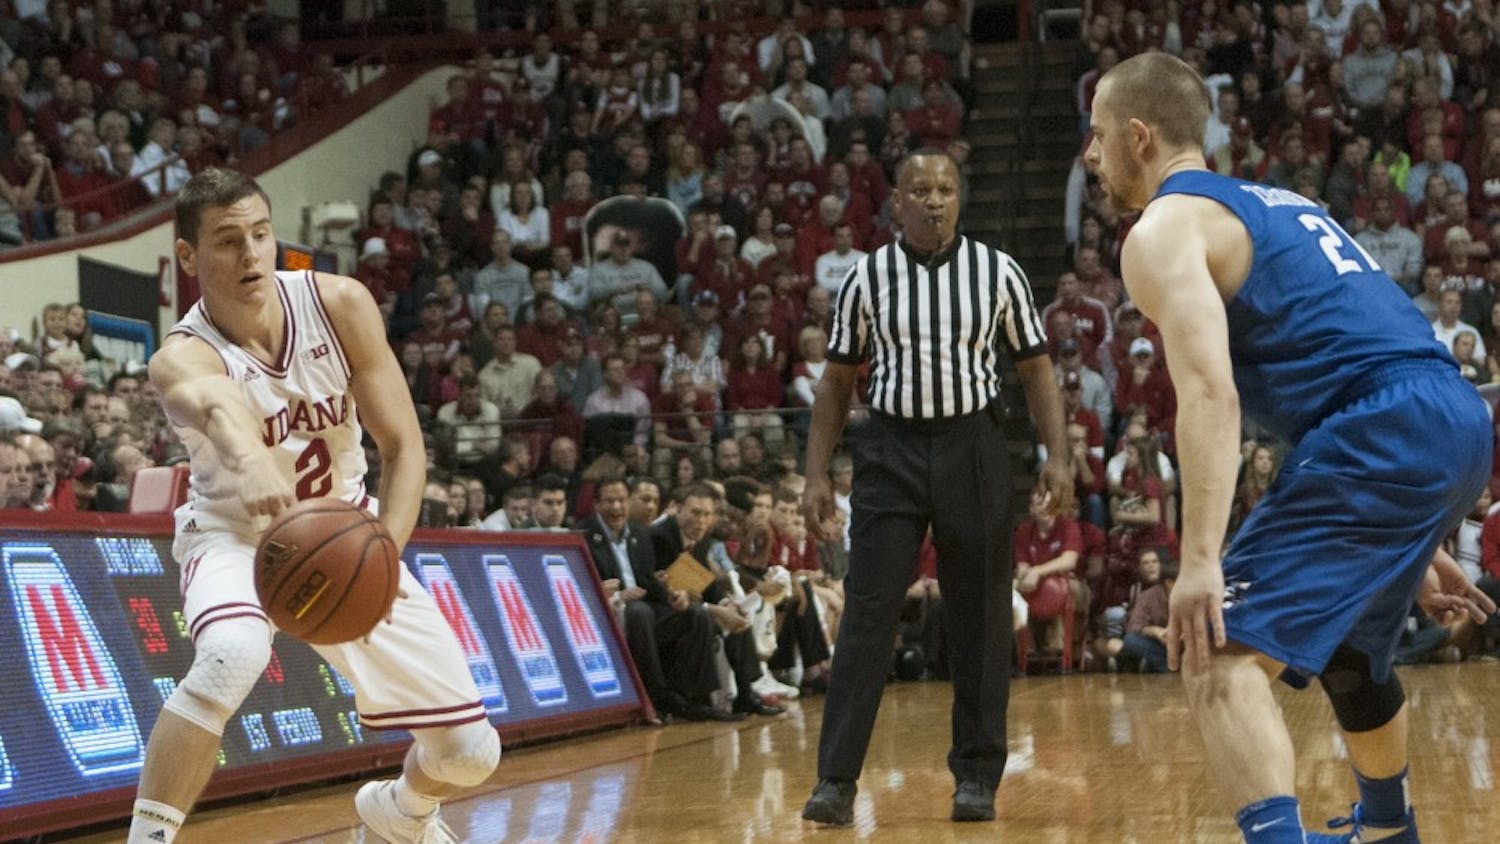 Redshirt senior Nick Zeisloft passes the ball during the game against Creighton on Thursday at Assembly Hall.